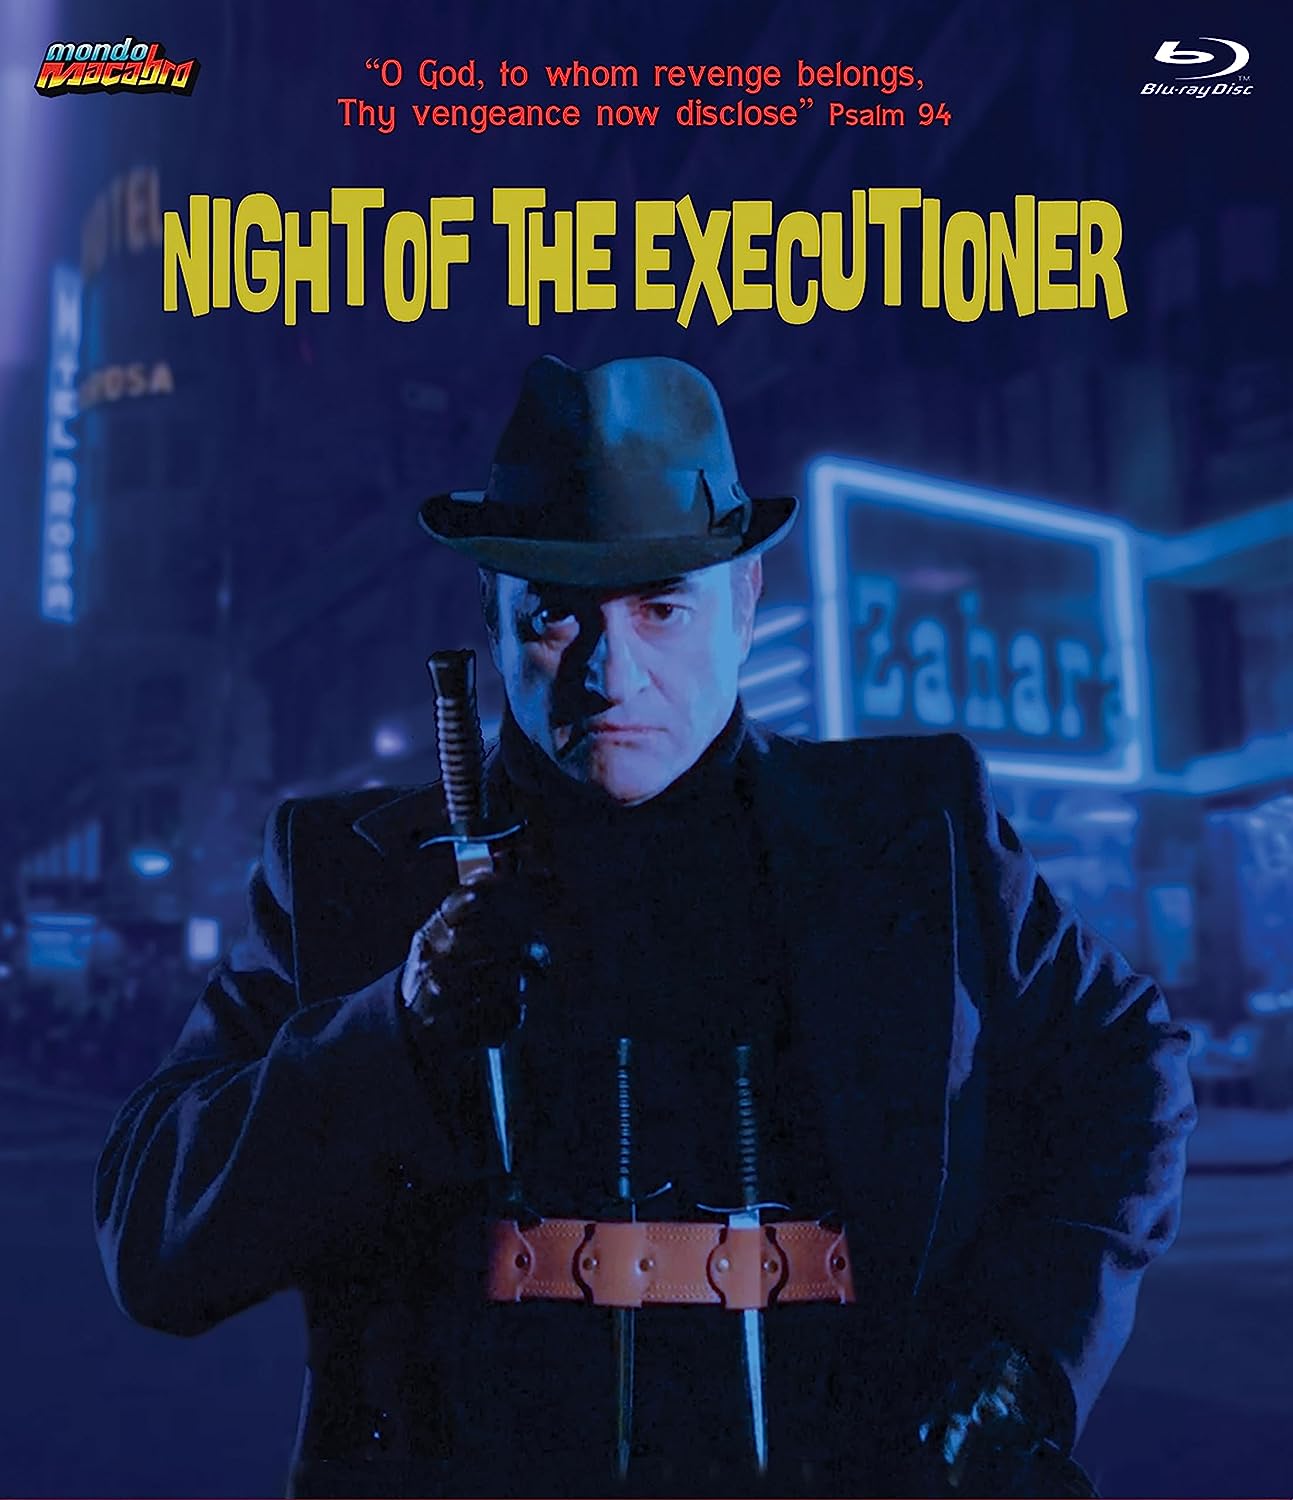 NIGHT OF THE EXECUTIONER BLU-RAY